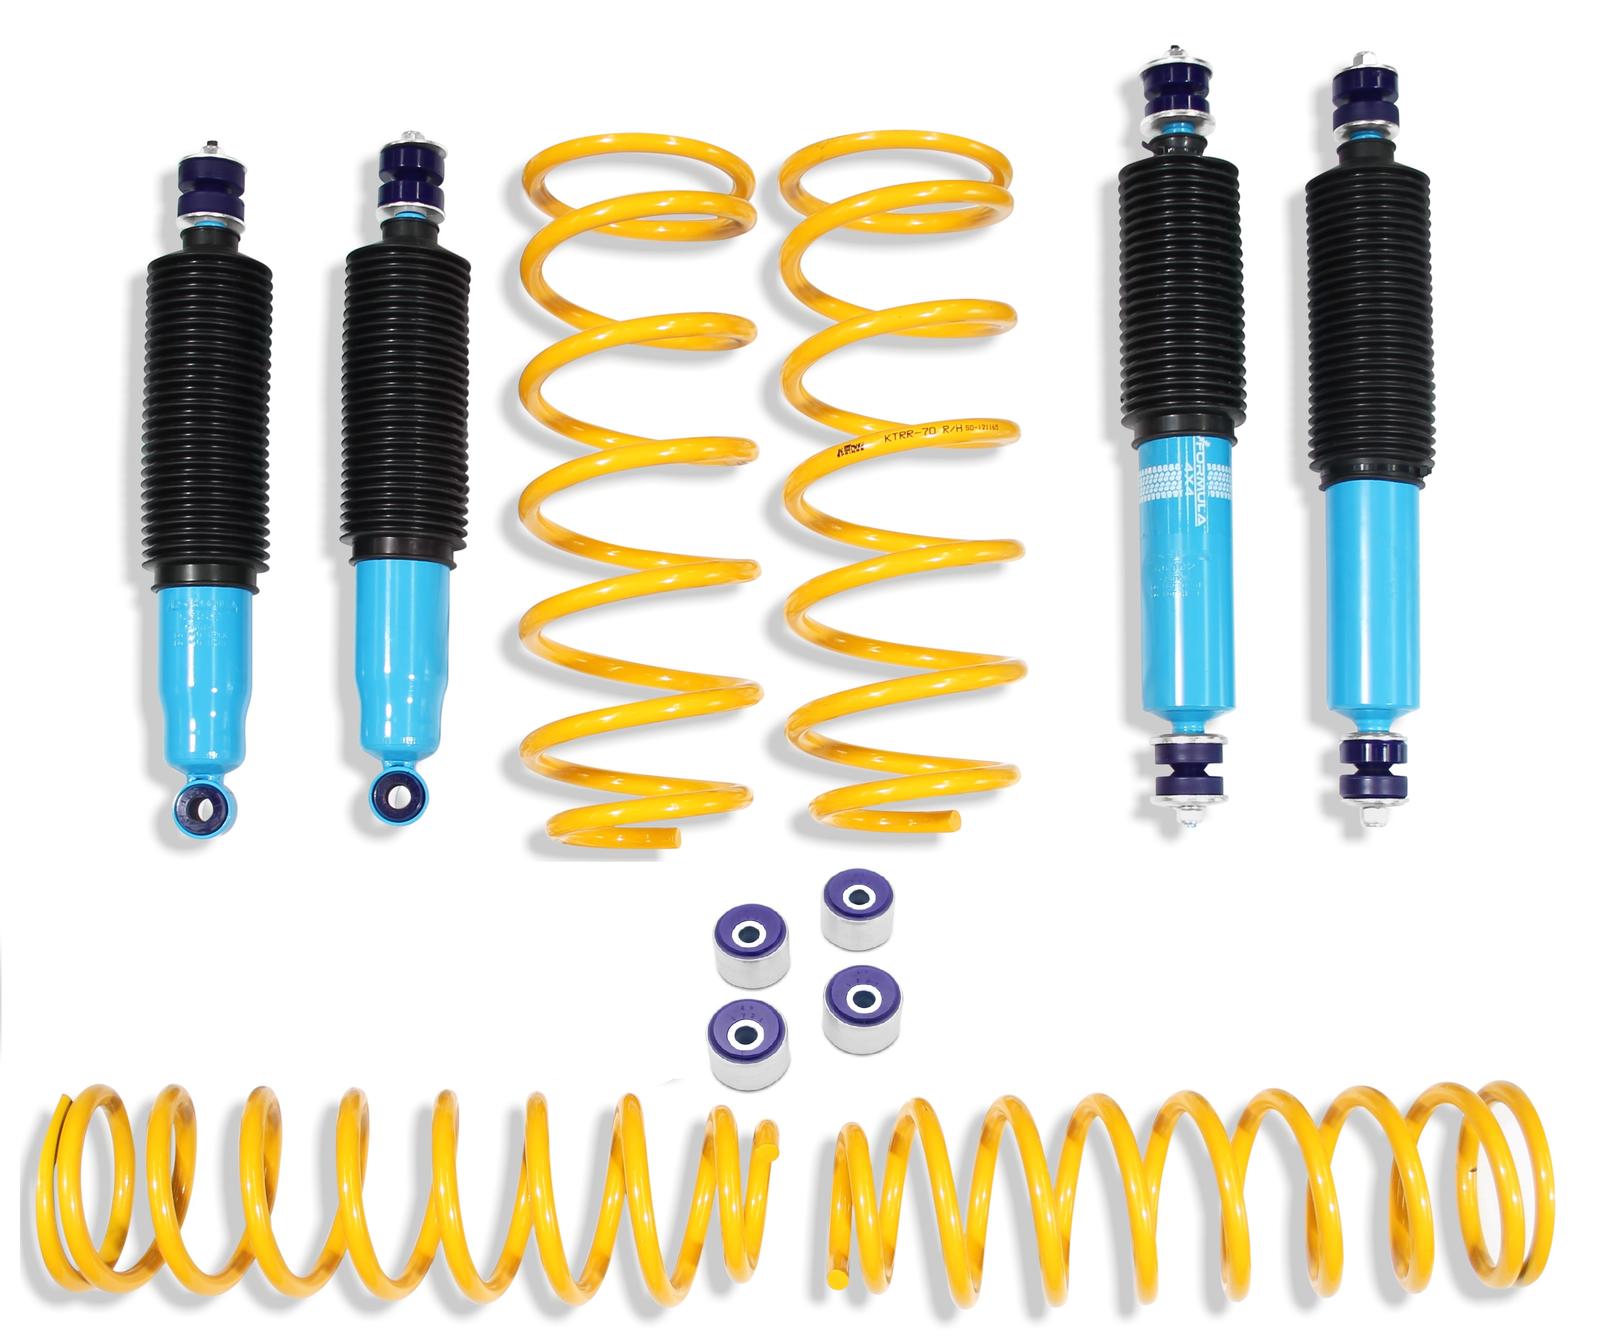 2 Inch 50mm Formula 4x4 Big Bore Lift Kit to suit Toyota Land Cruiser 80 Series from 1990-08/1991